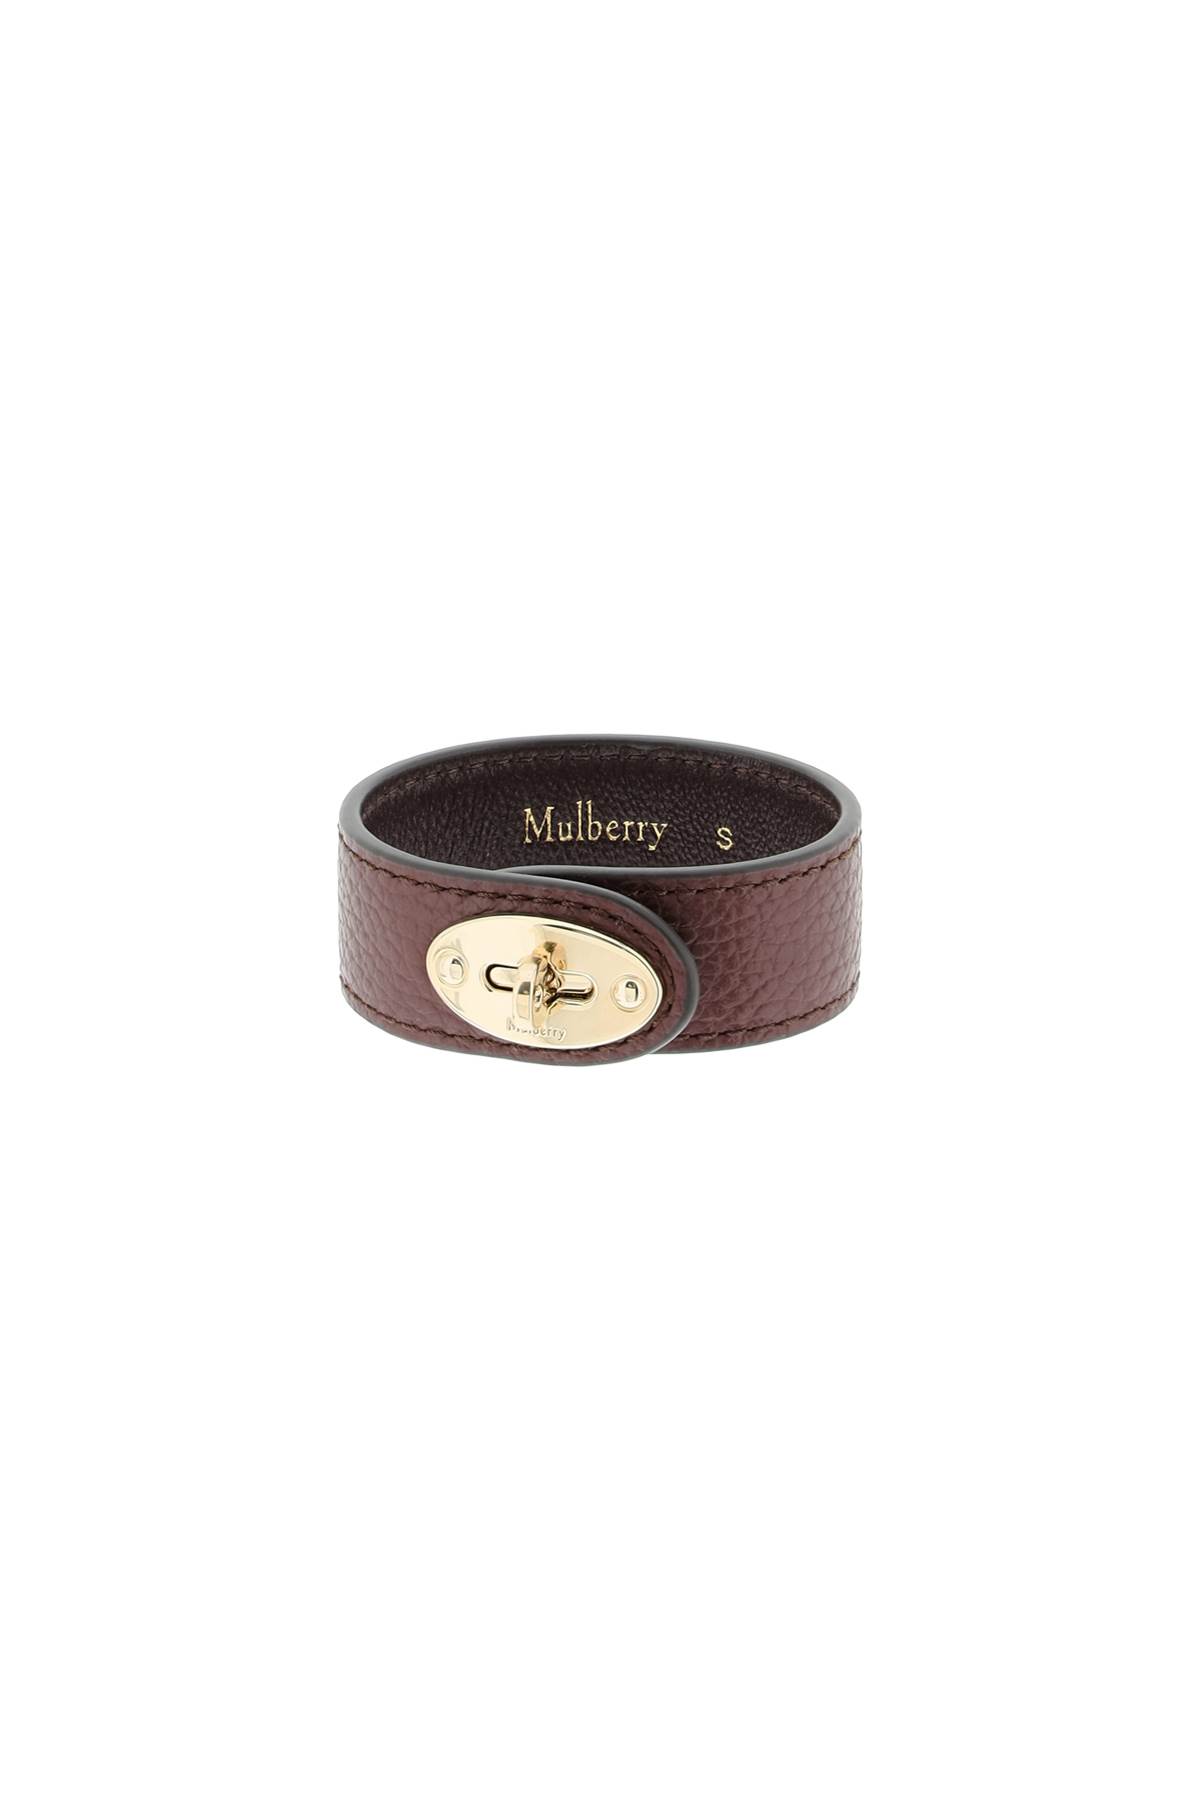 MULBERRY LEATHER BAYSWATER BRACELET